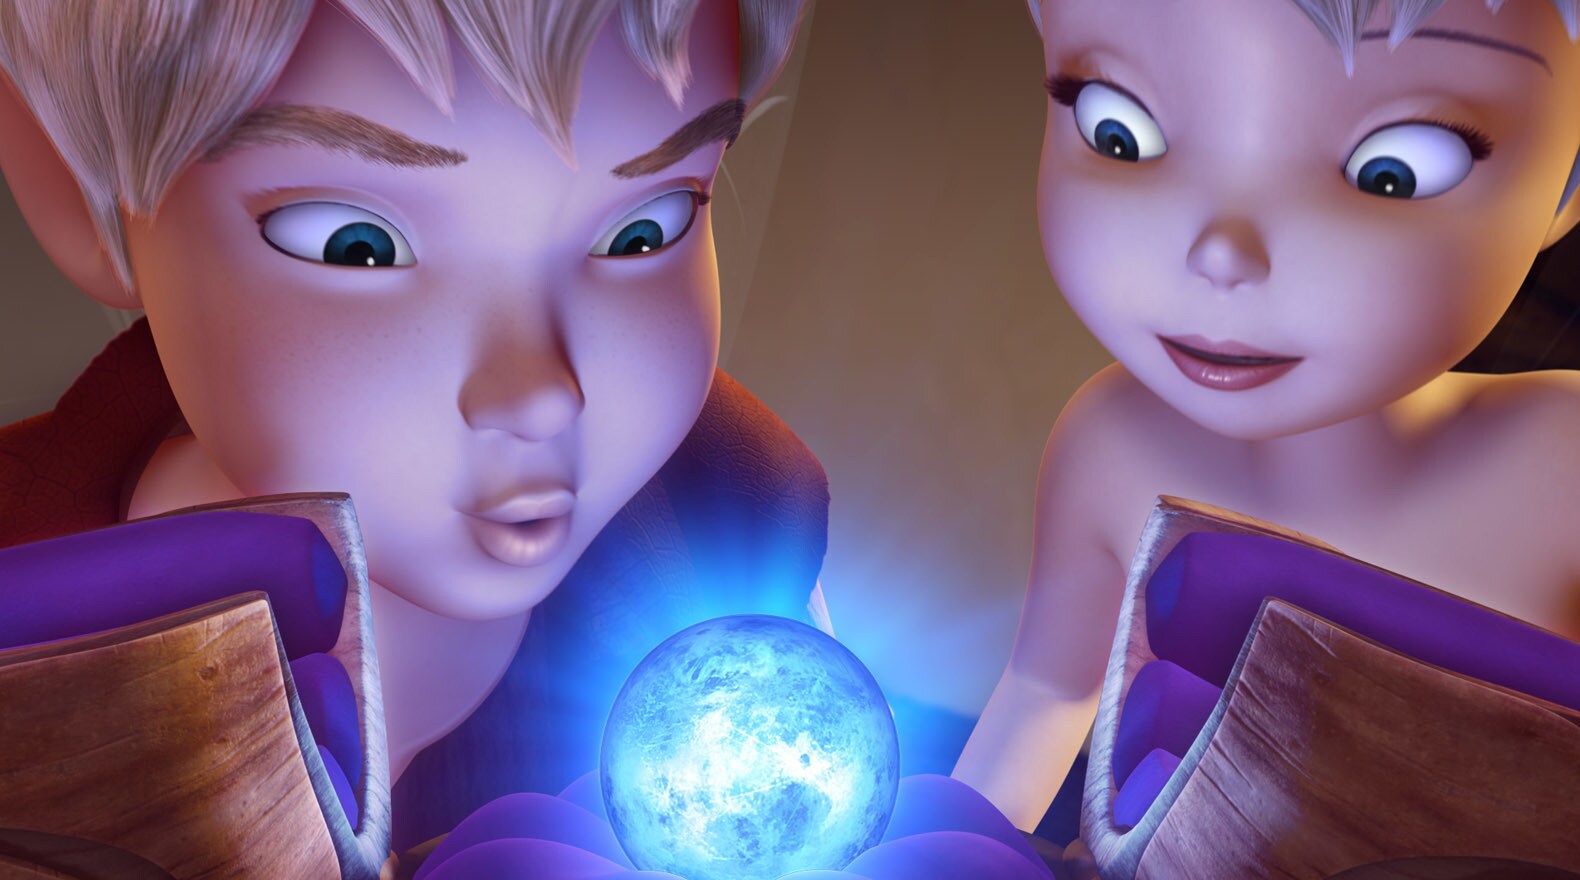 Tink and Terence work together to build a scepter for the moonstone.